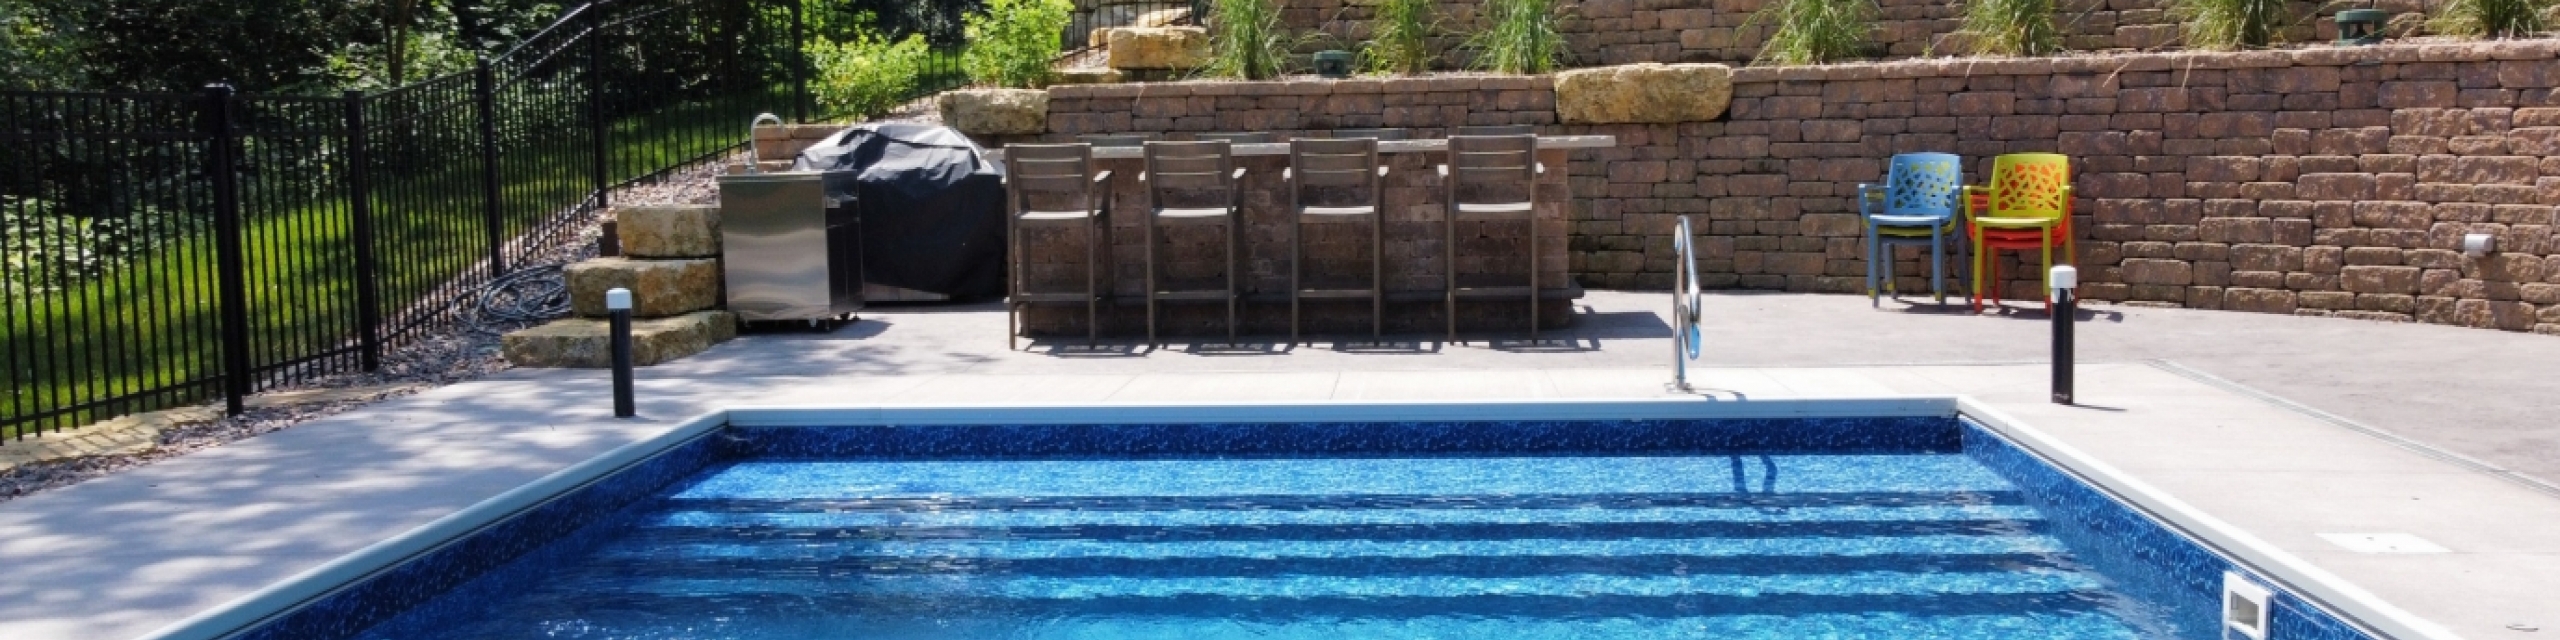 Pool and retaining wall.